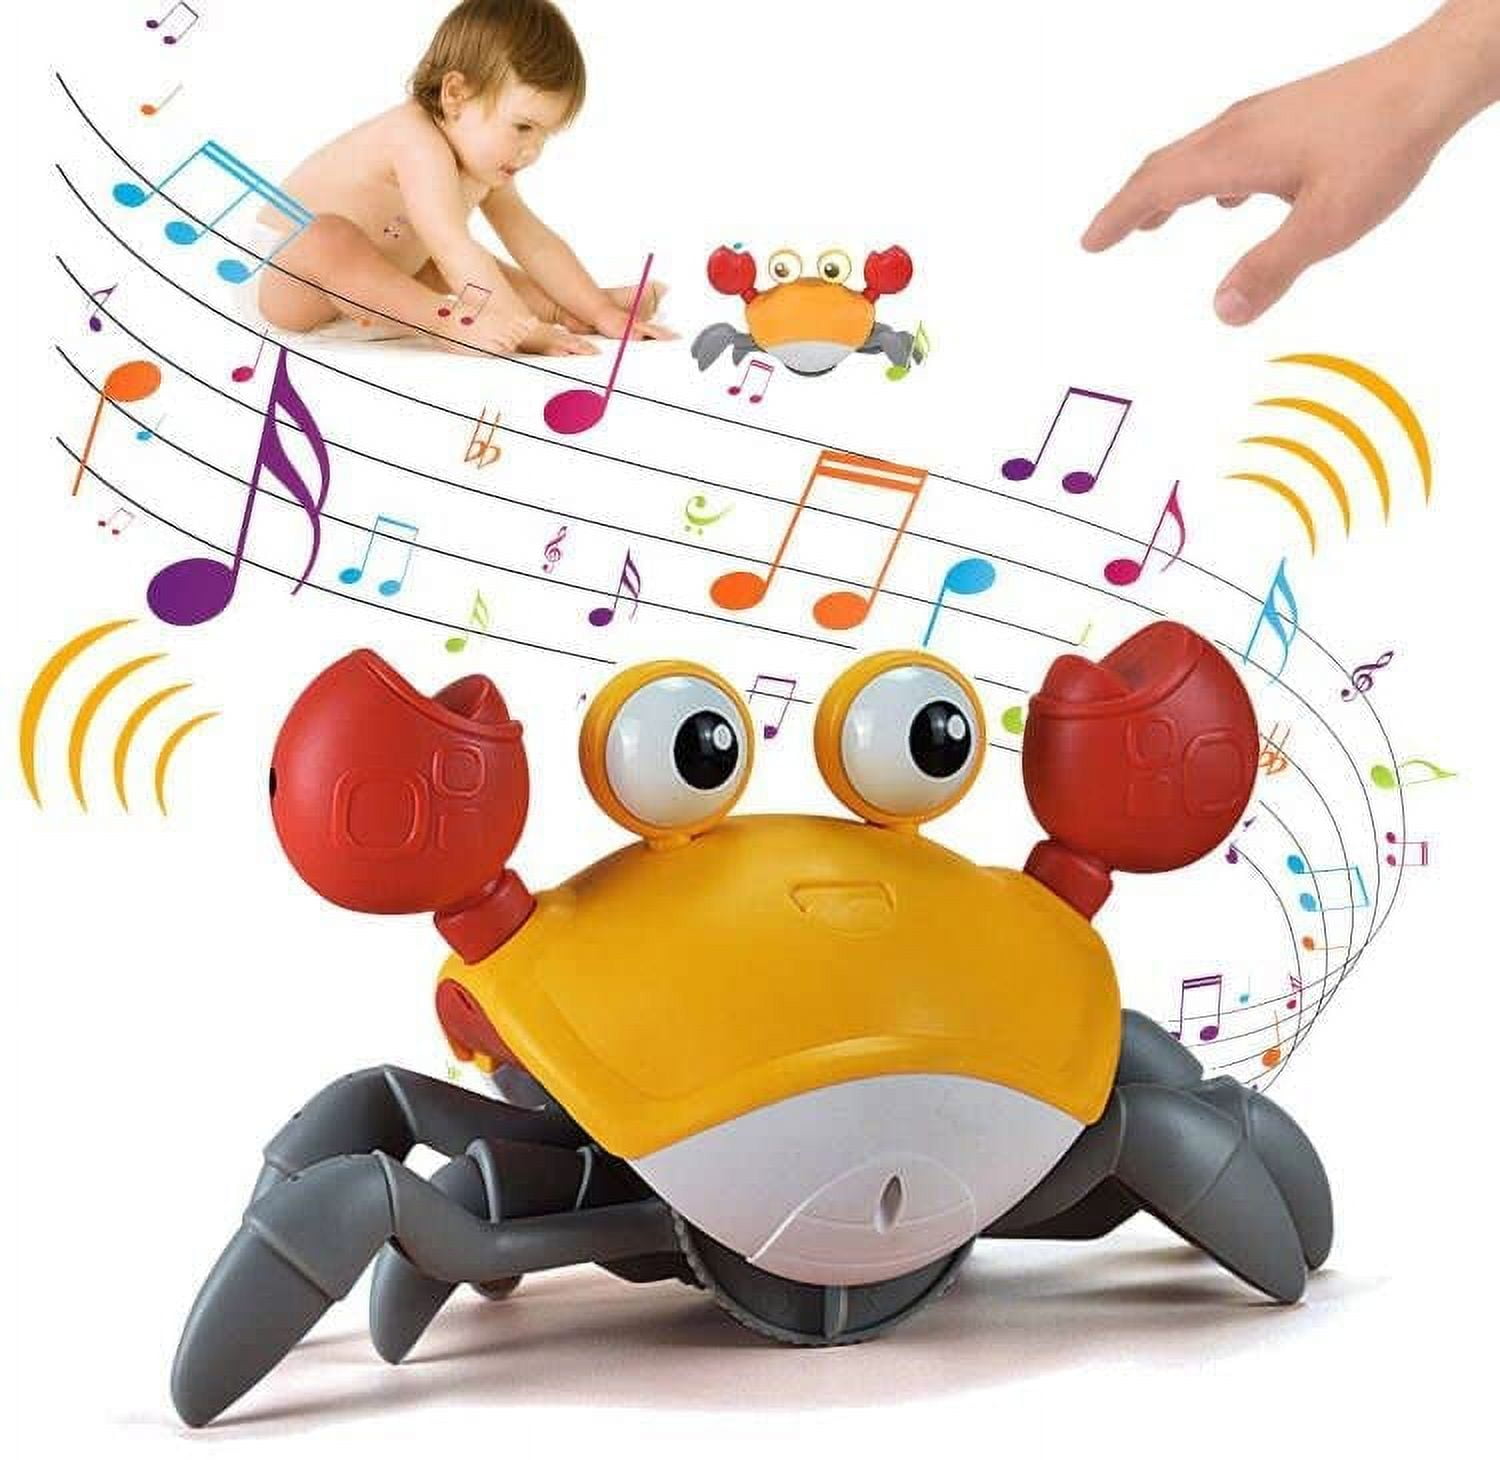 Crawling Crab Baby Toy with Music and LED Lights for Kids, Sensing Crawling  Crab Toddler Interactive Learning Development Toy Gift for Kids Boys